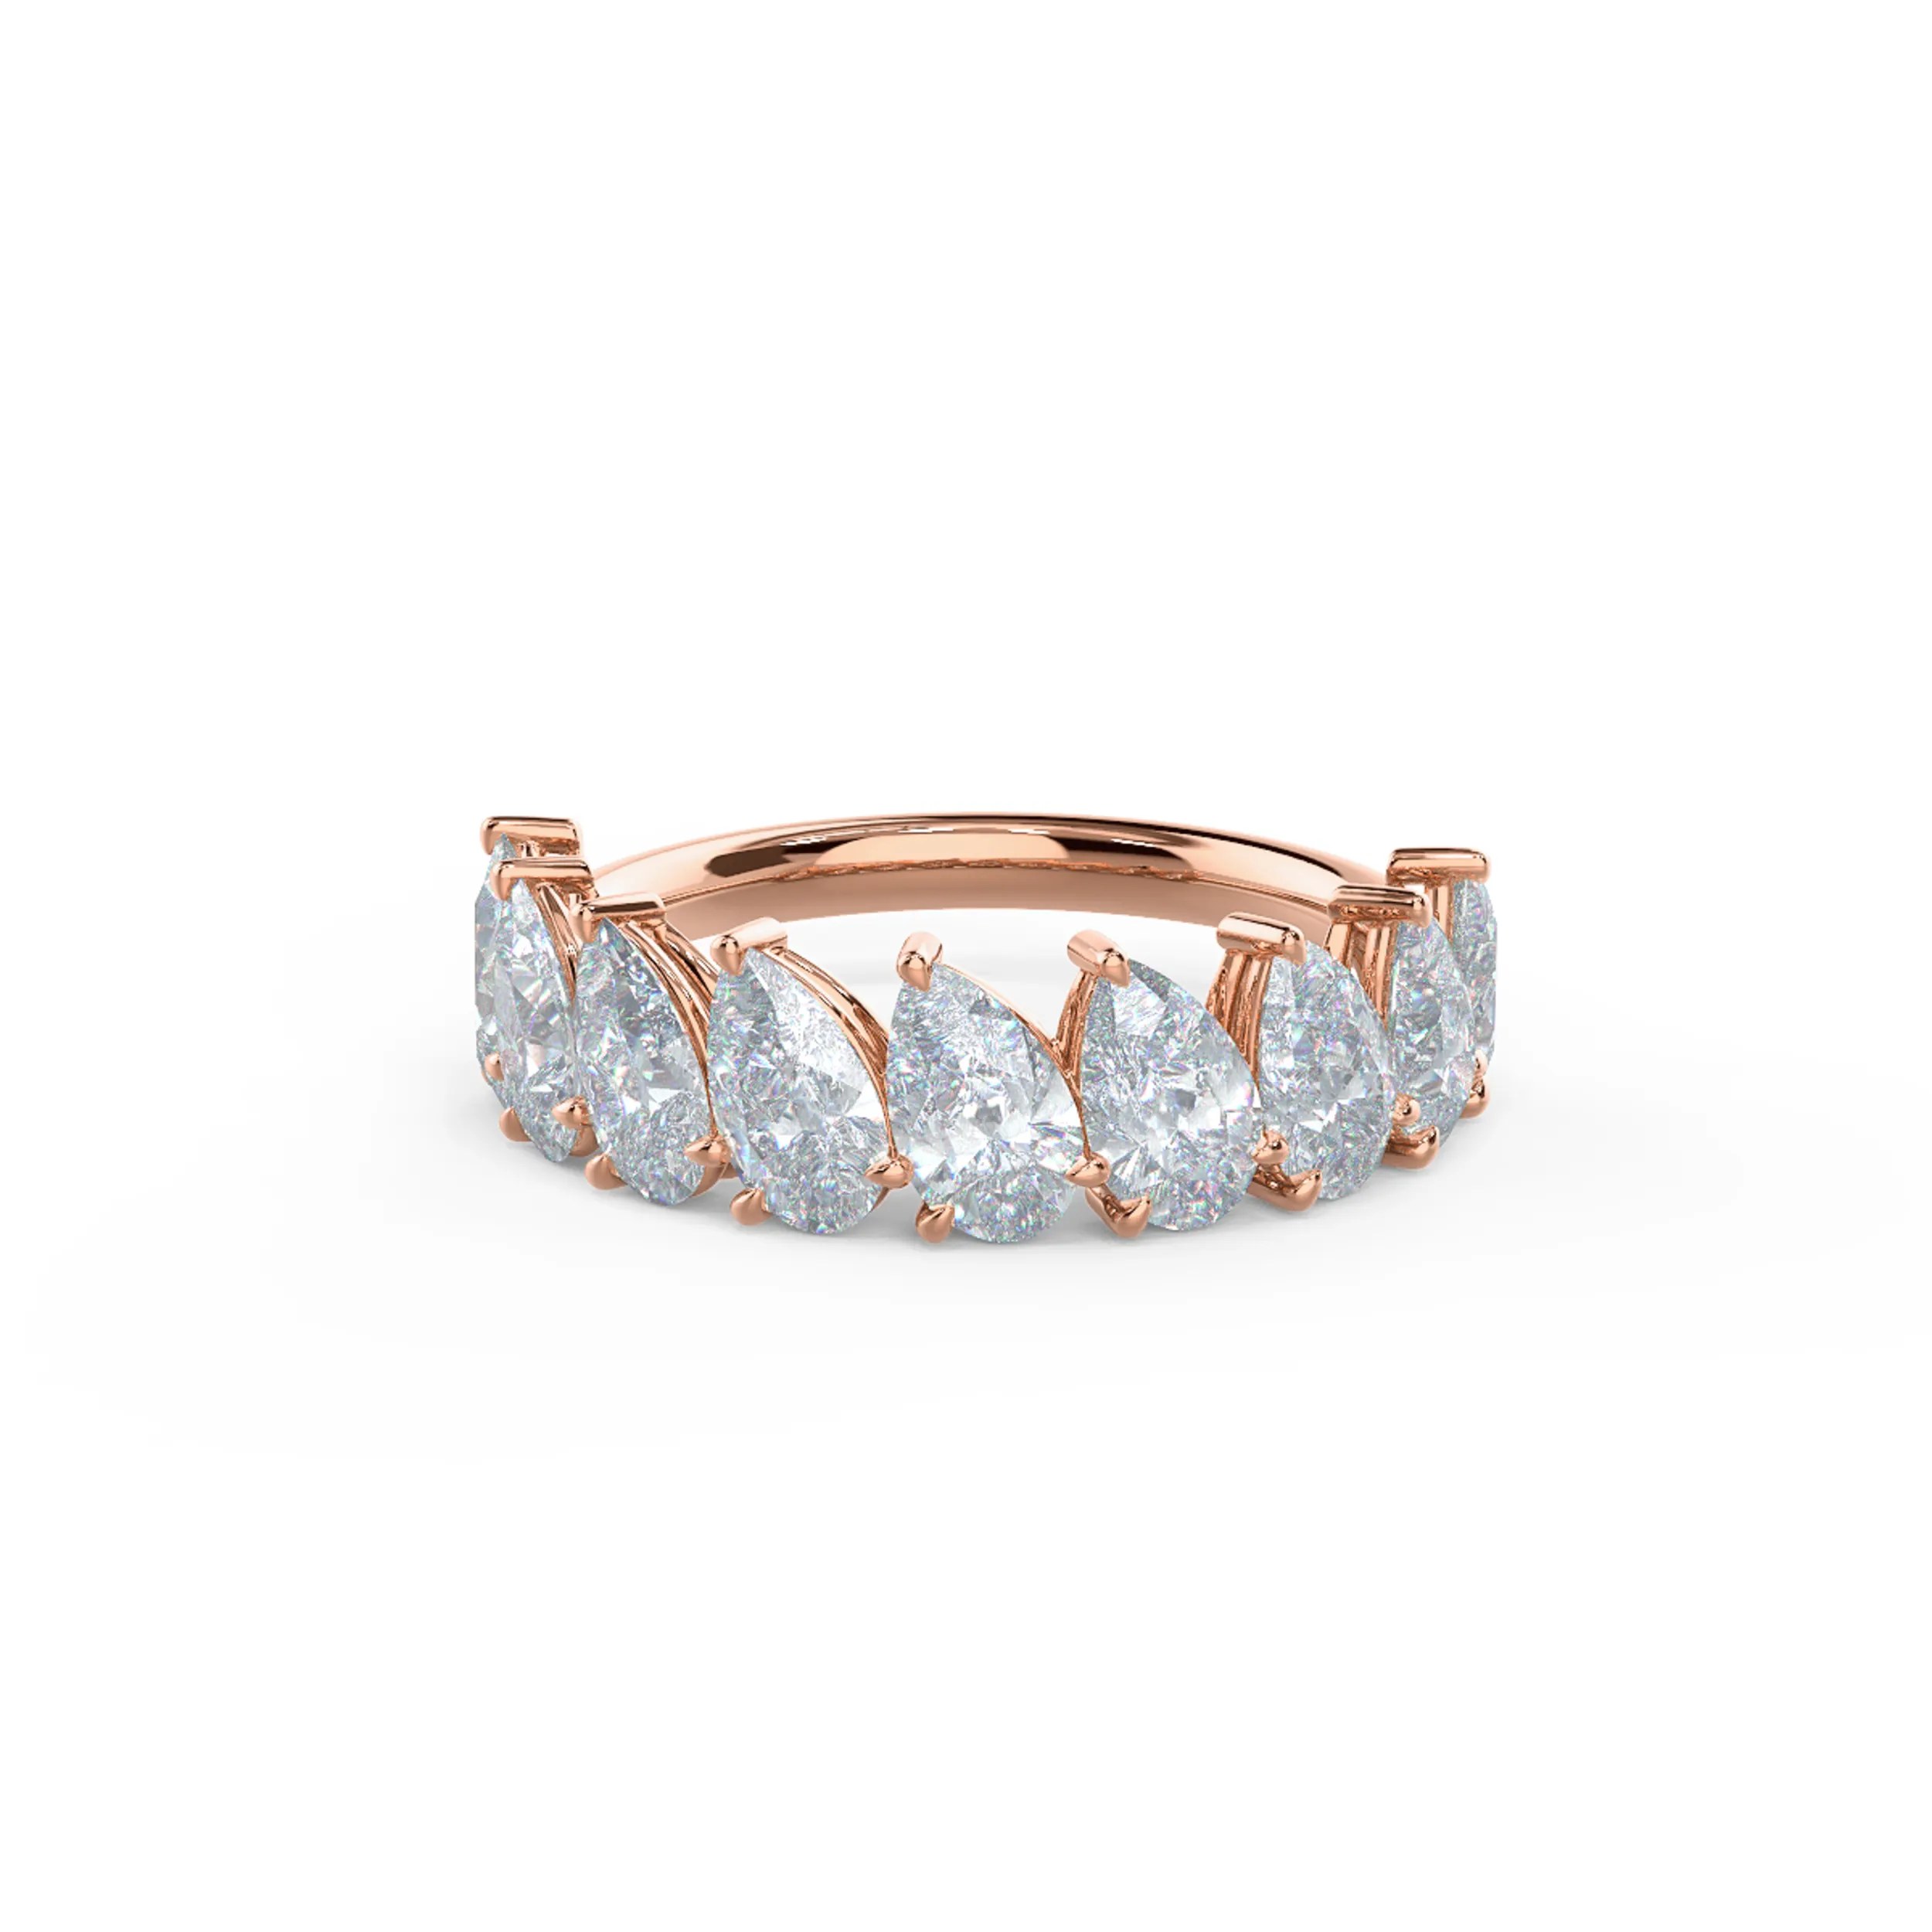 2.5 Carat Lab Created Diamonds set in 14k Rose Gold Pear Angled Half Band (Main View)